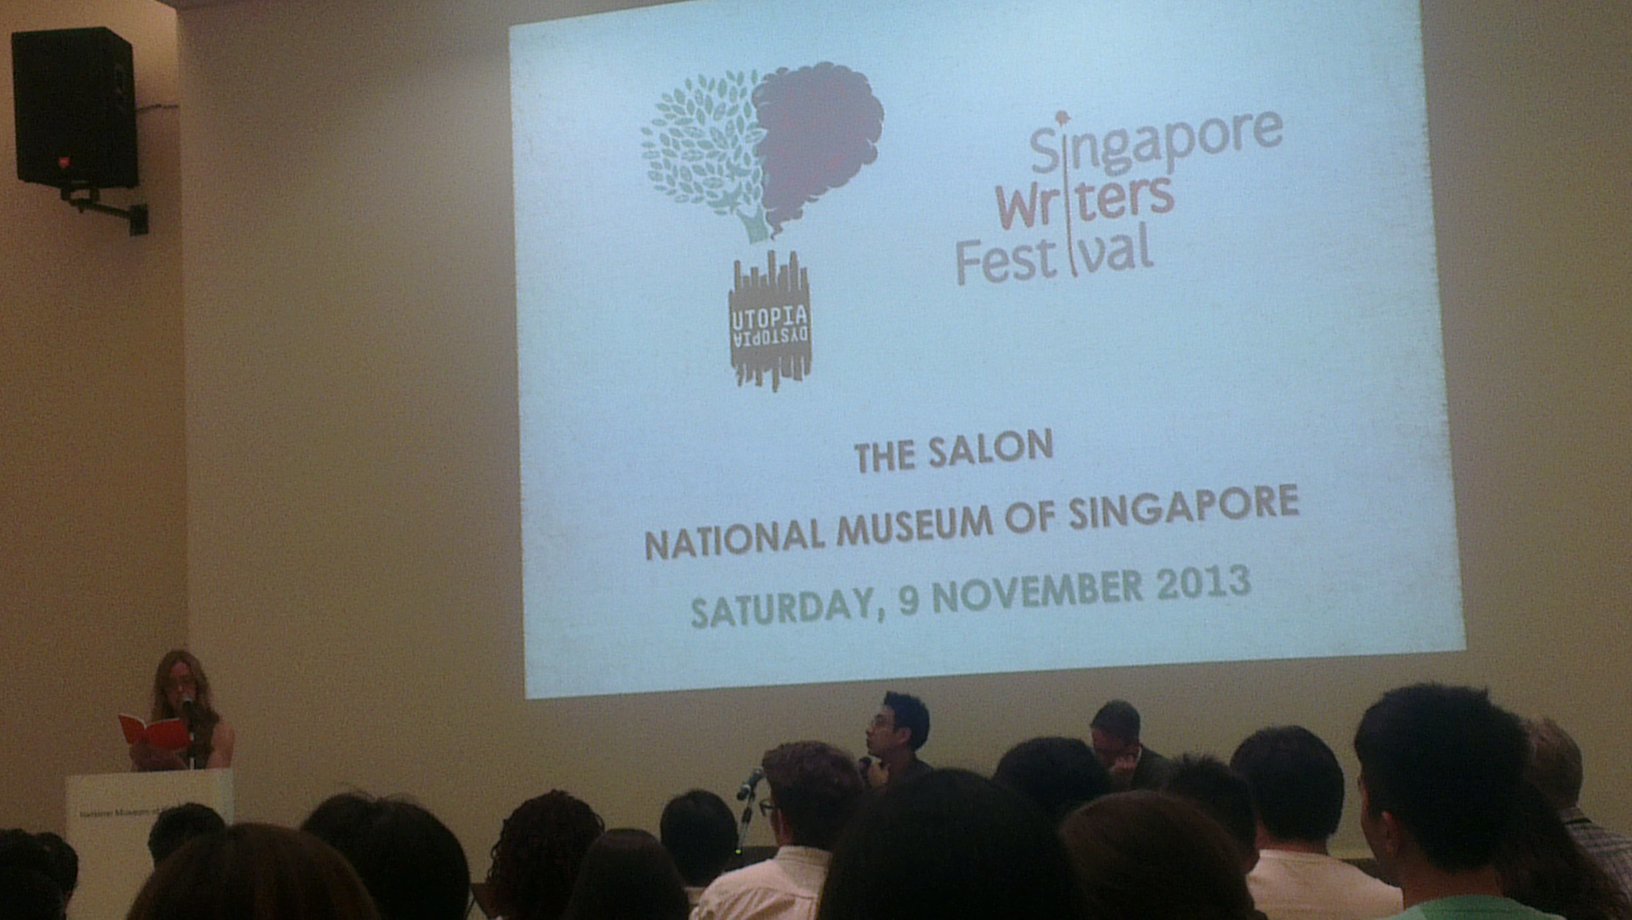  Poetry recitals by Nordic authors during SWF 